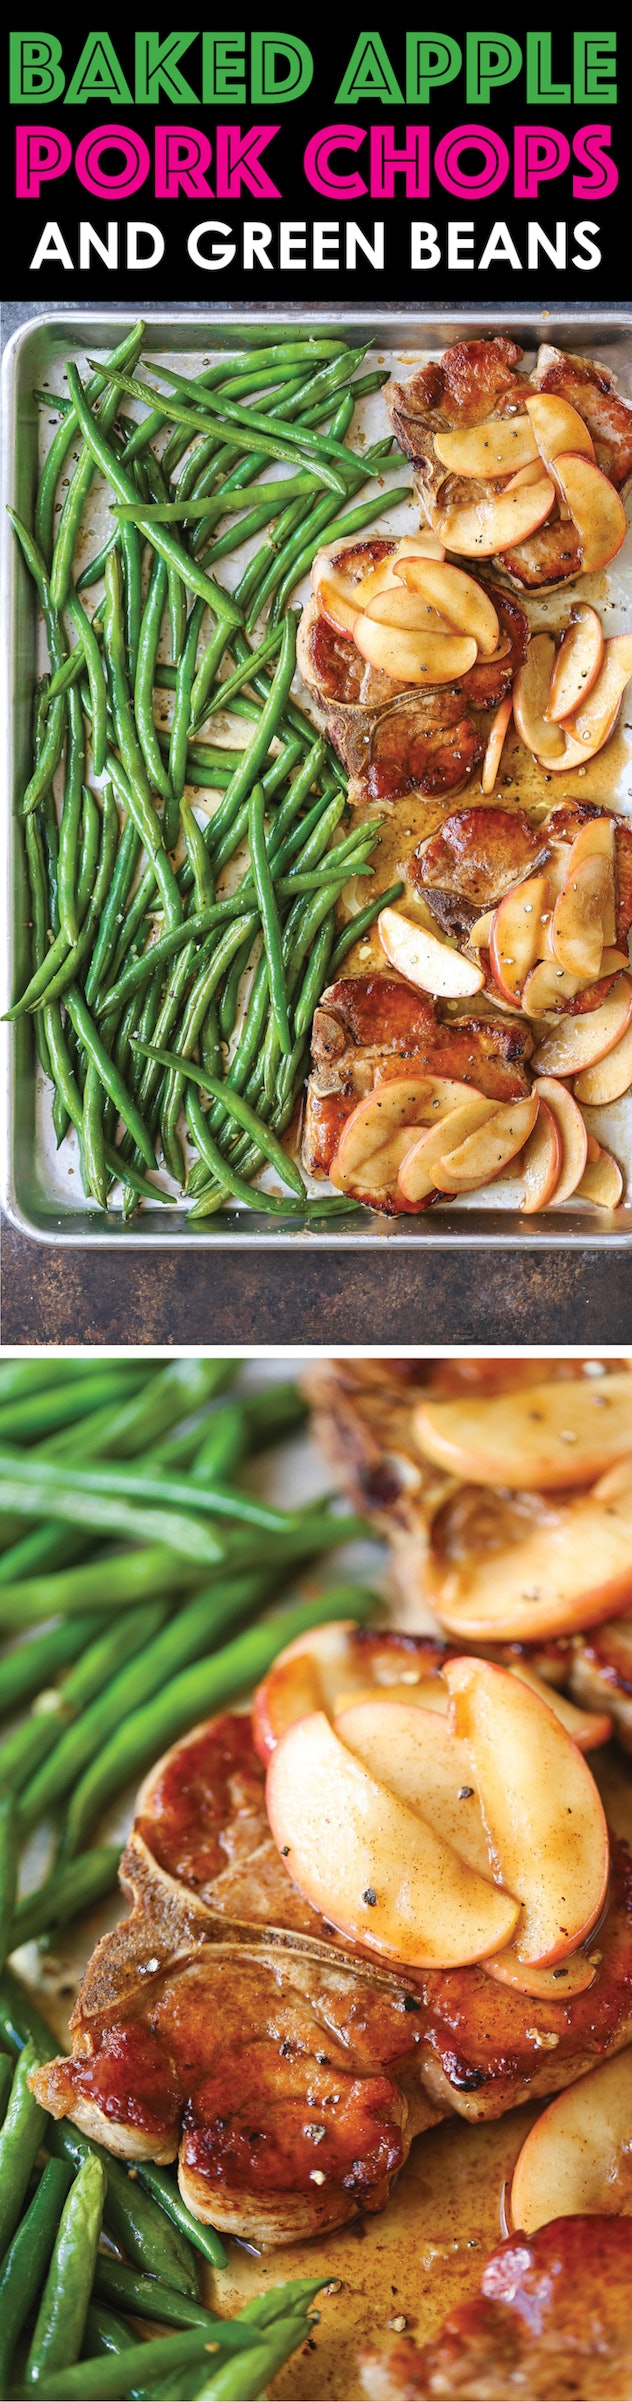 sheet pan recipes with pork, Baked Apple Pork Chops And Green Beans